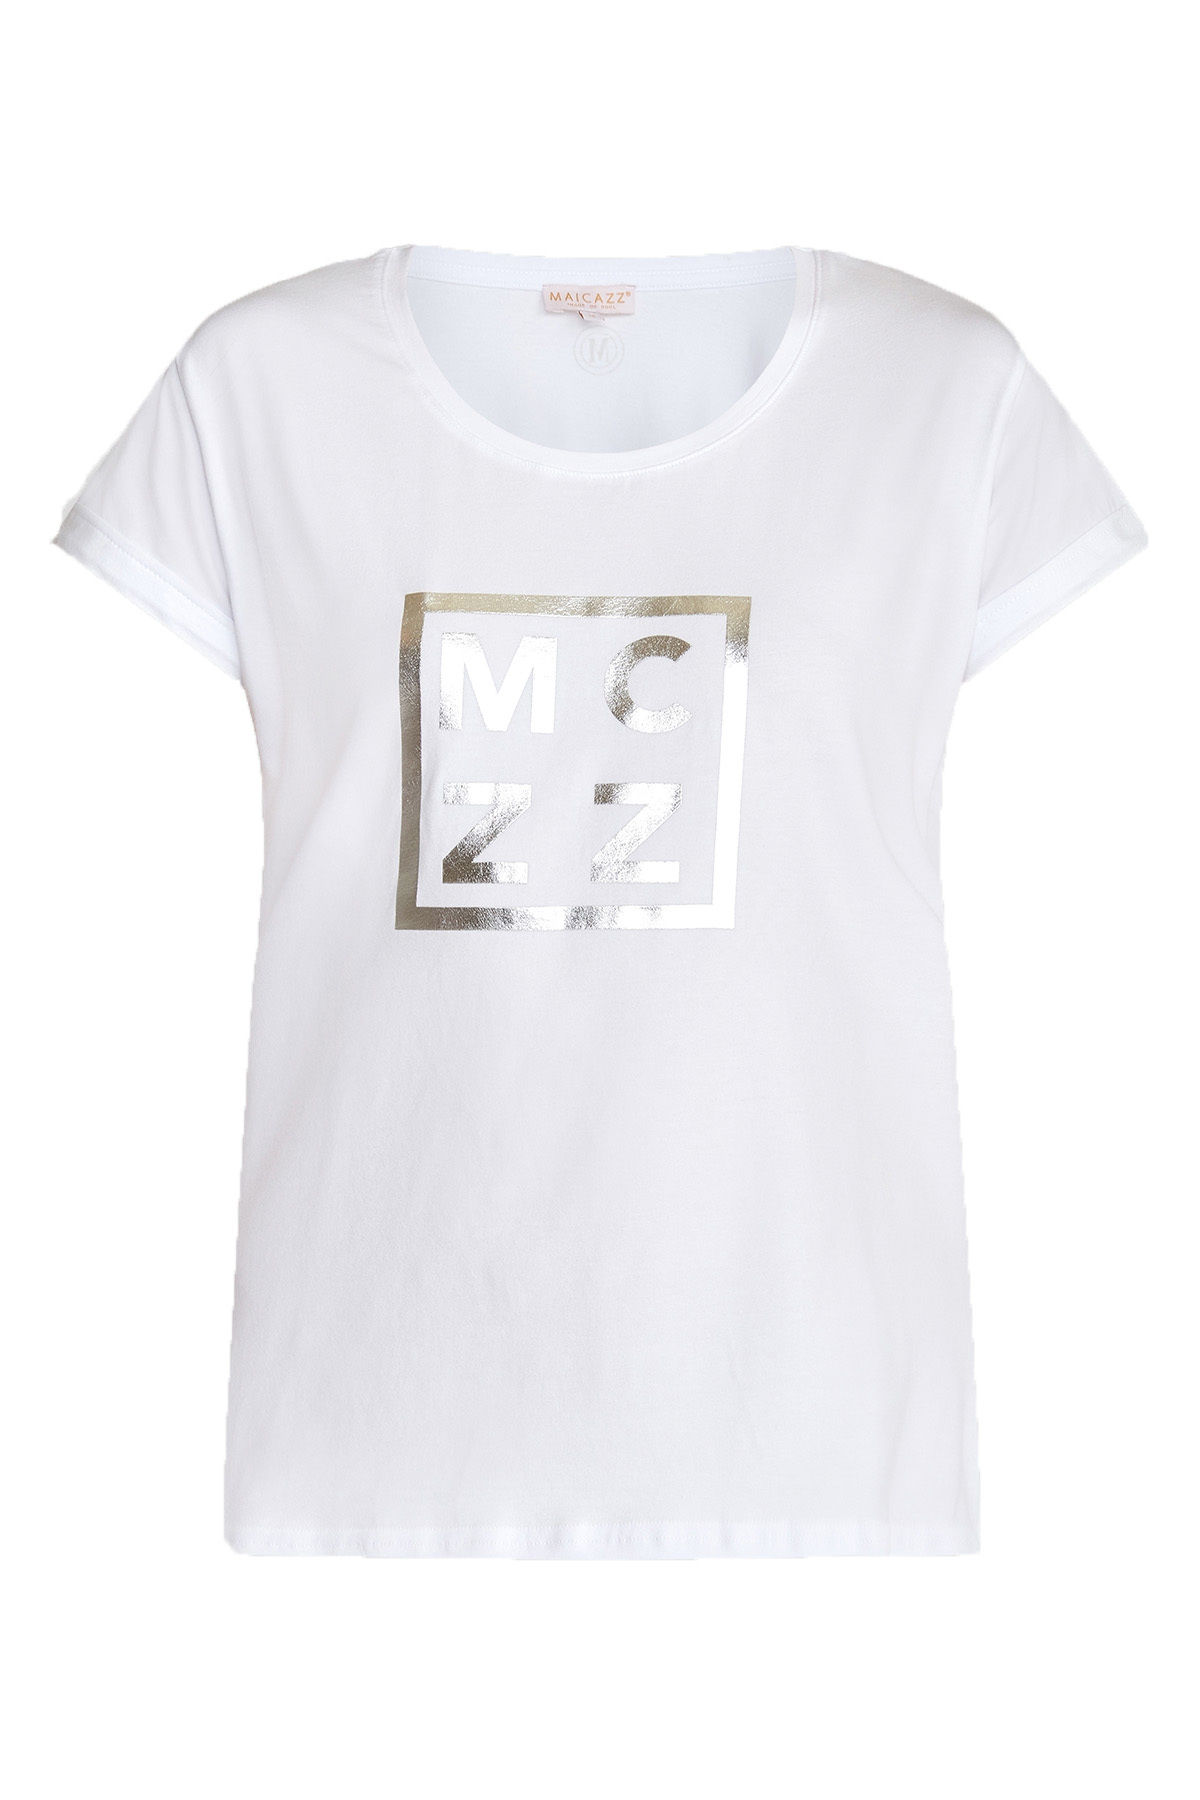 MAICAZZ T-Shirt Onora Bright White-Silver